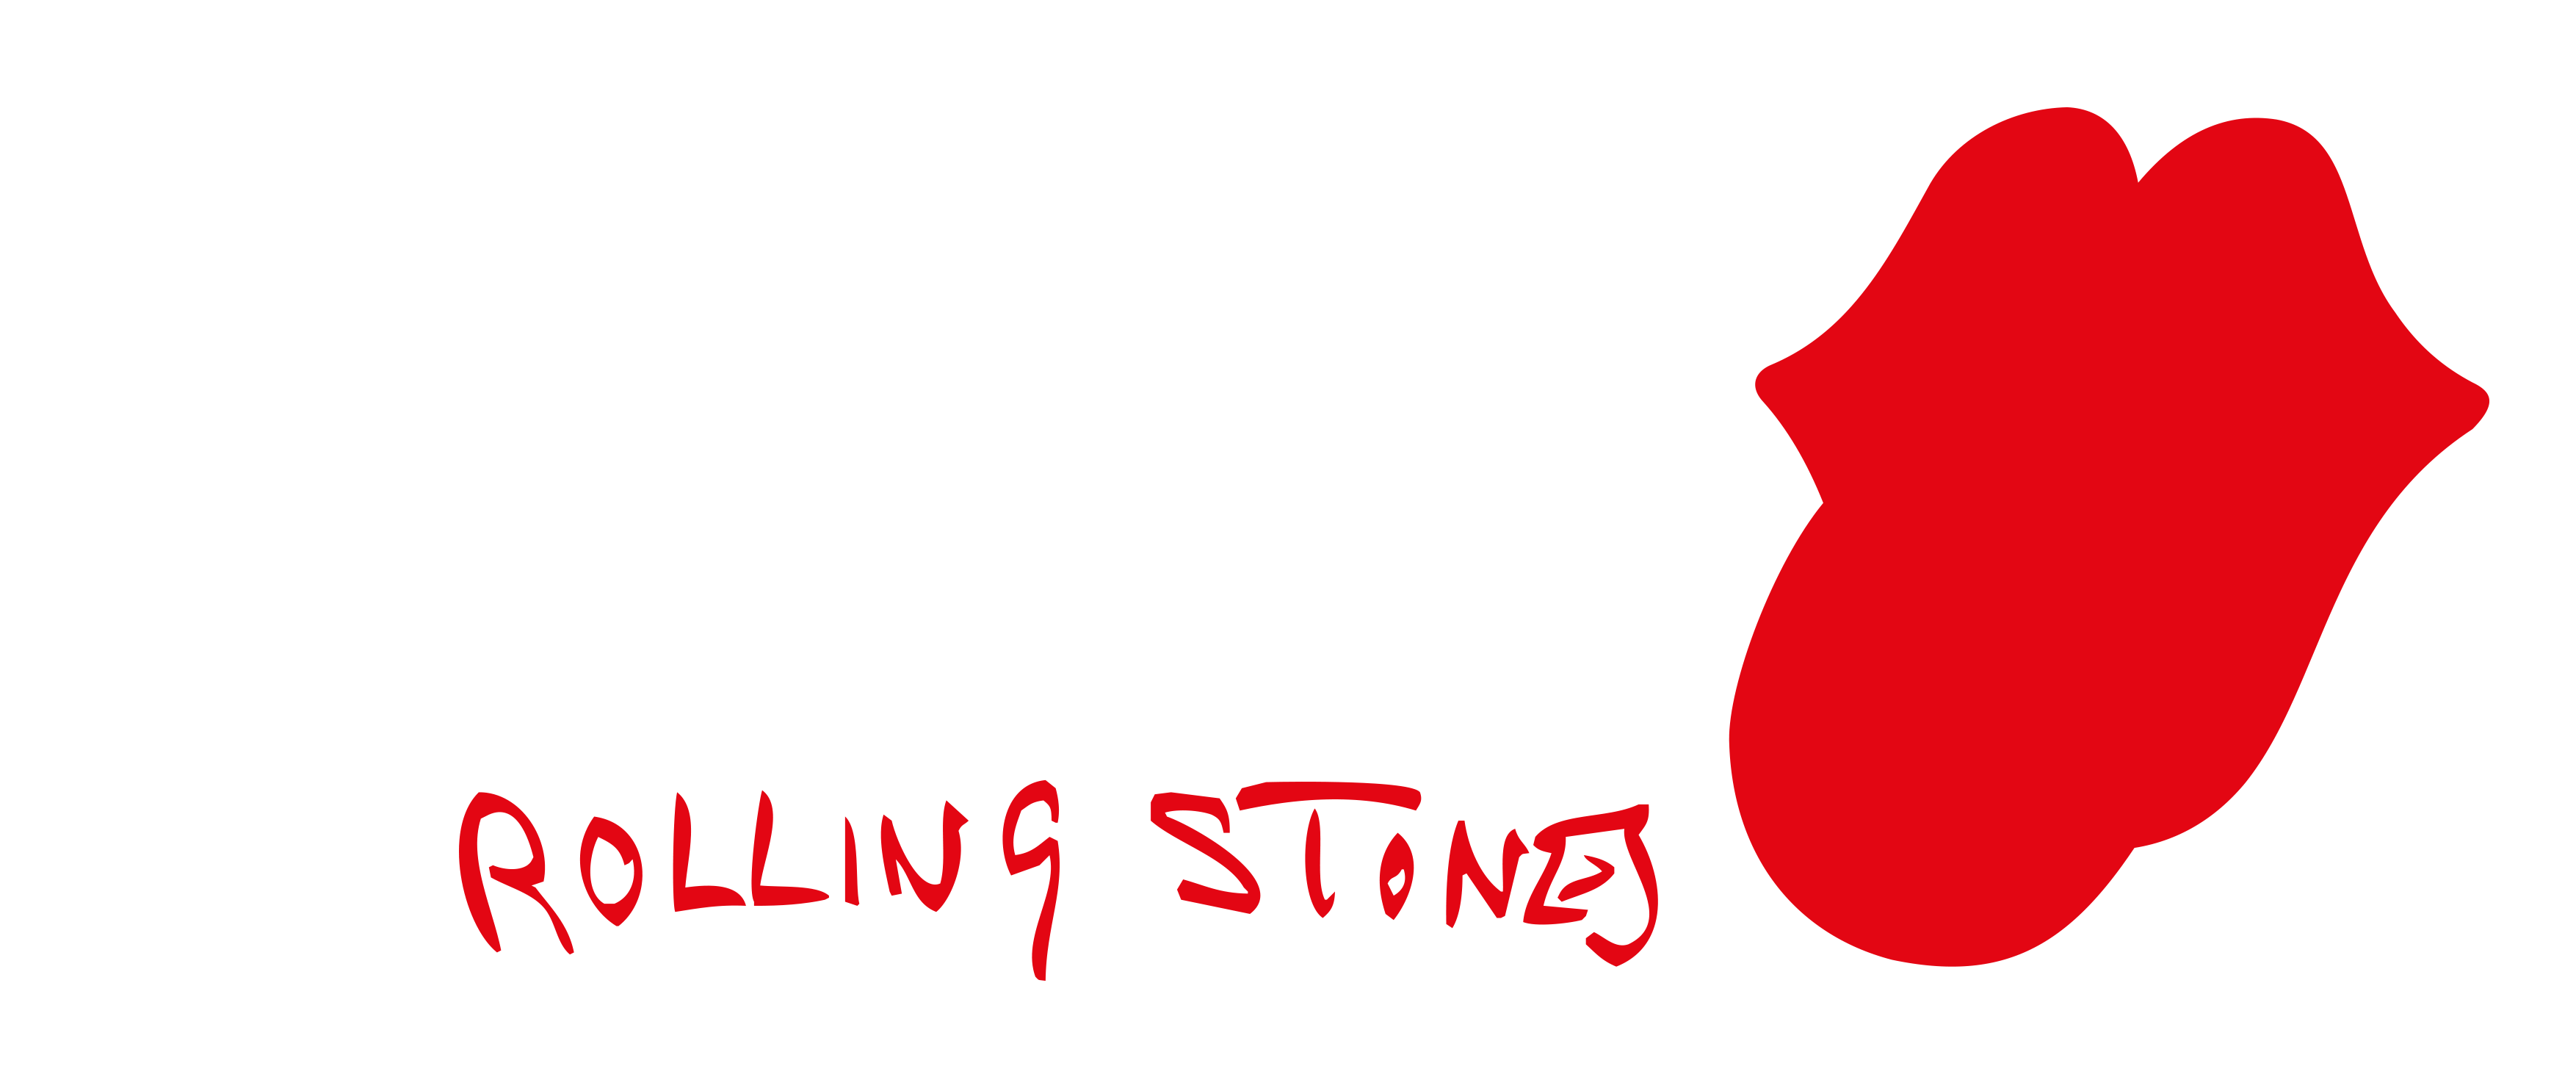 Exile Rolling Stones